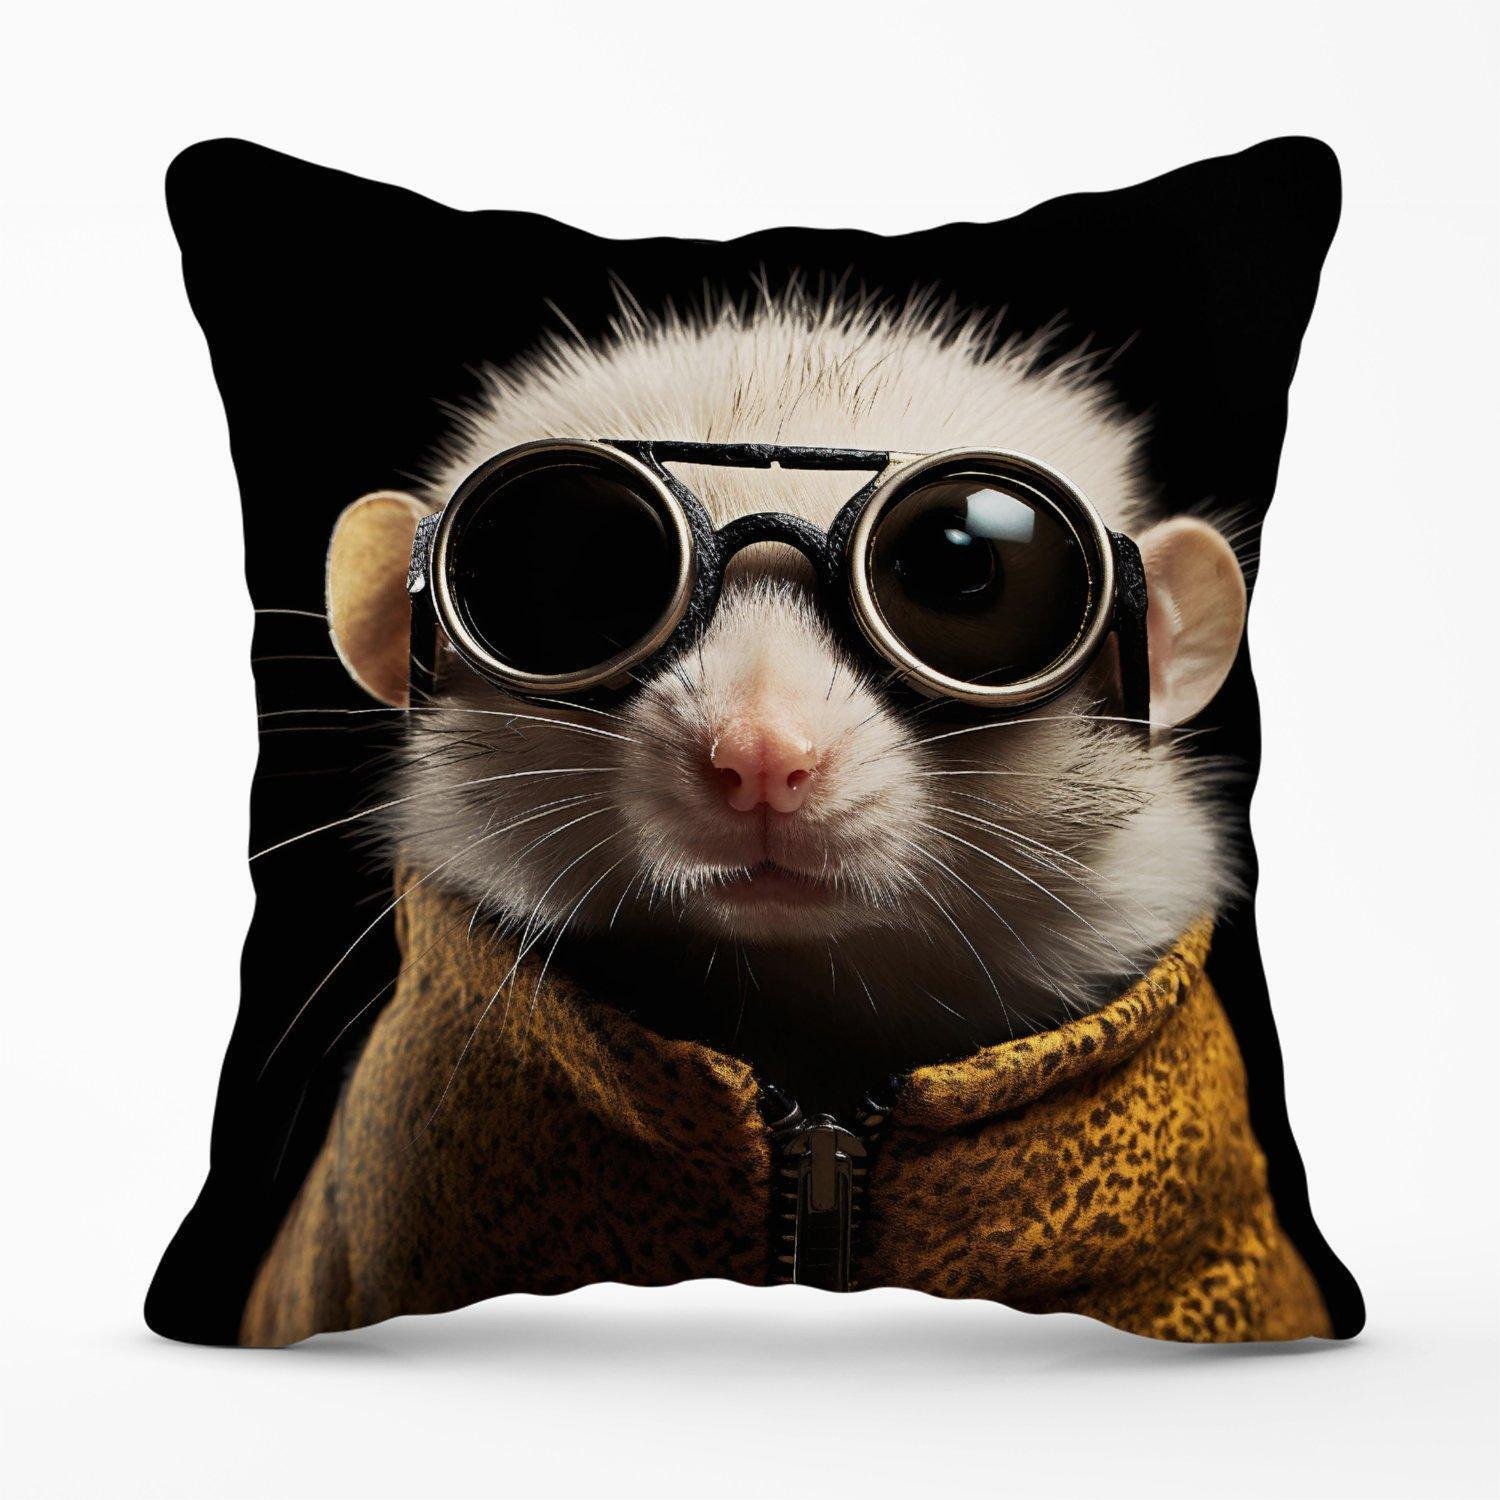 Realistic Doormouse with Glasses Outdoor Cushion - image 1